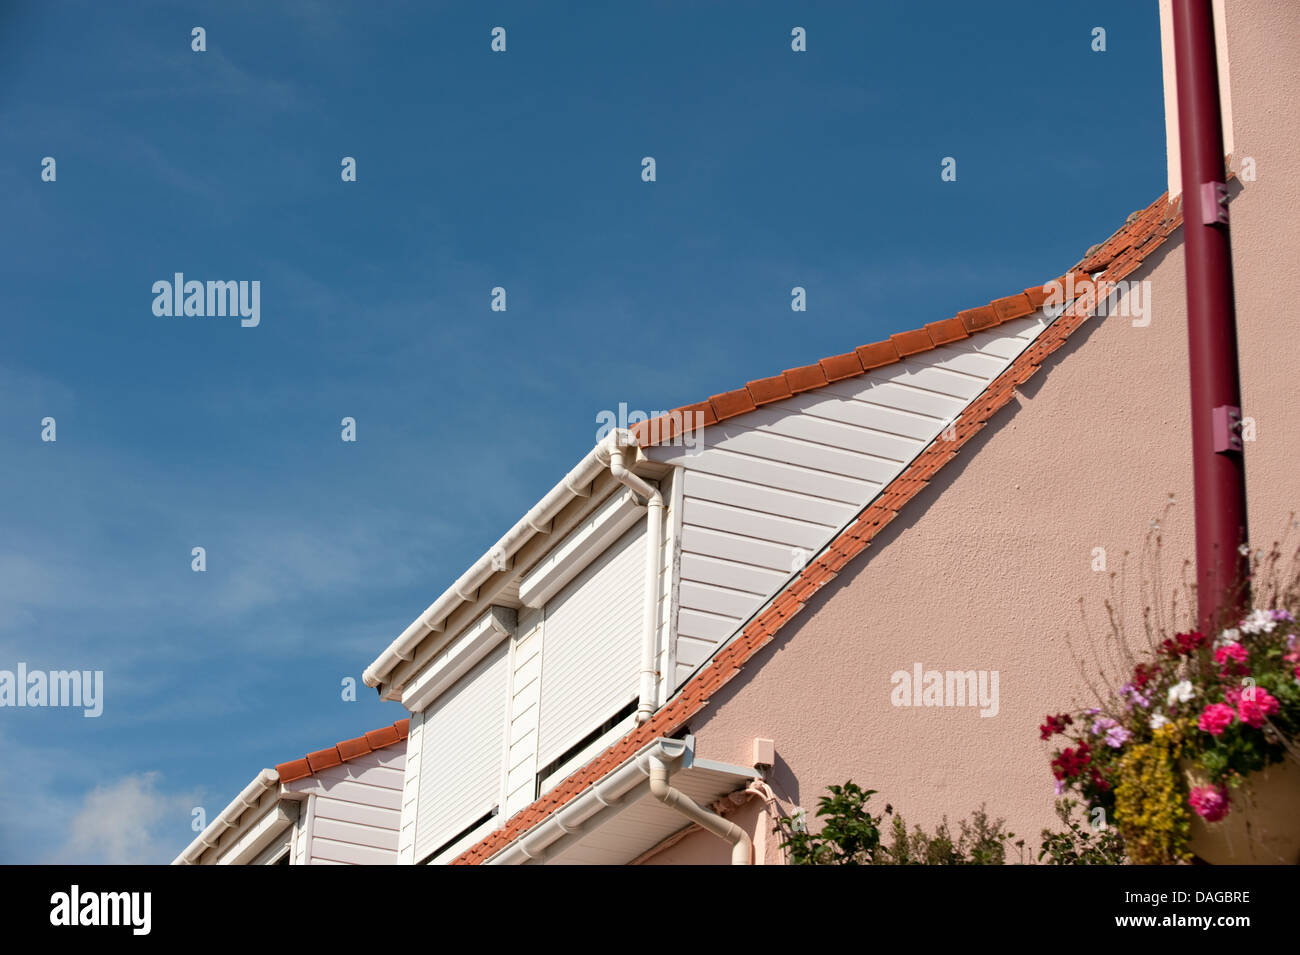 Dormer Roof Outrigger Loft Extension Bargeboard Stock Photo